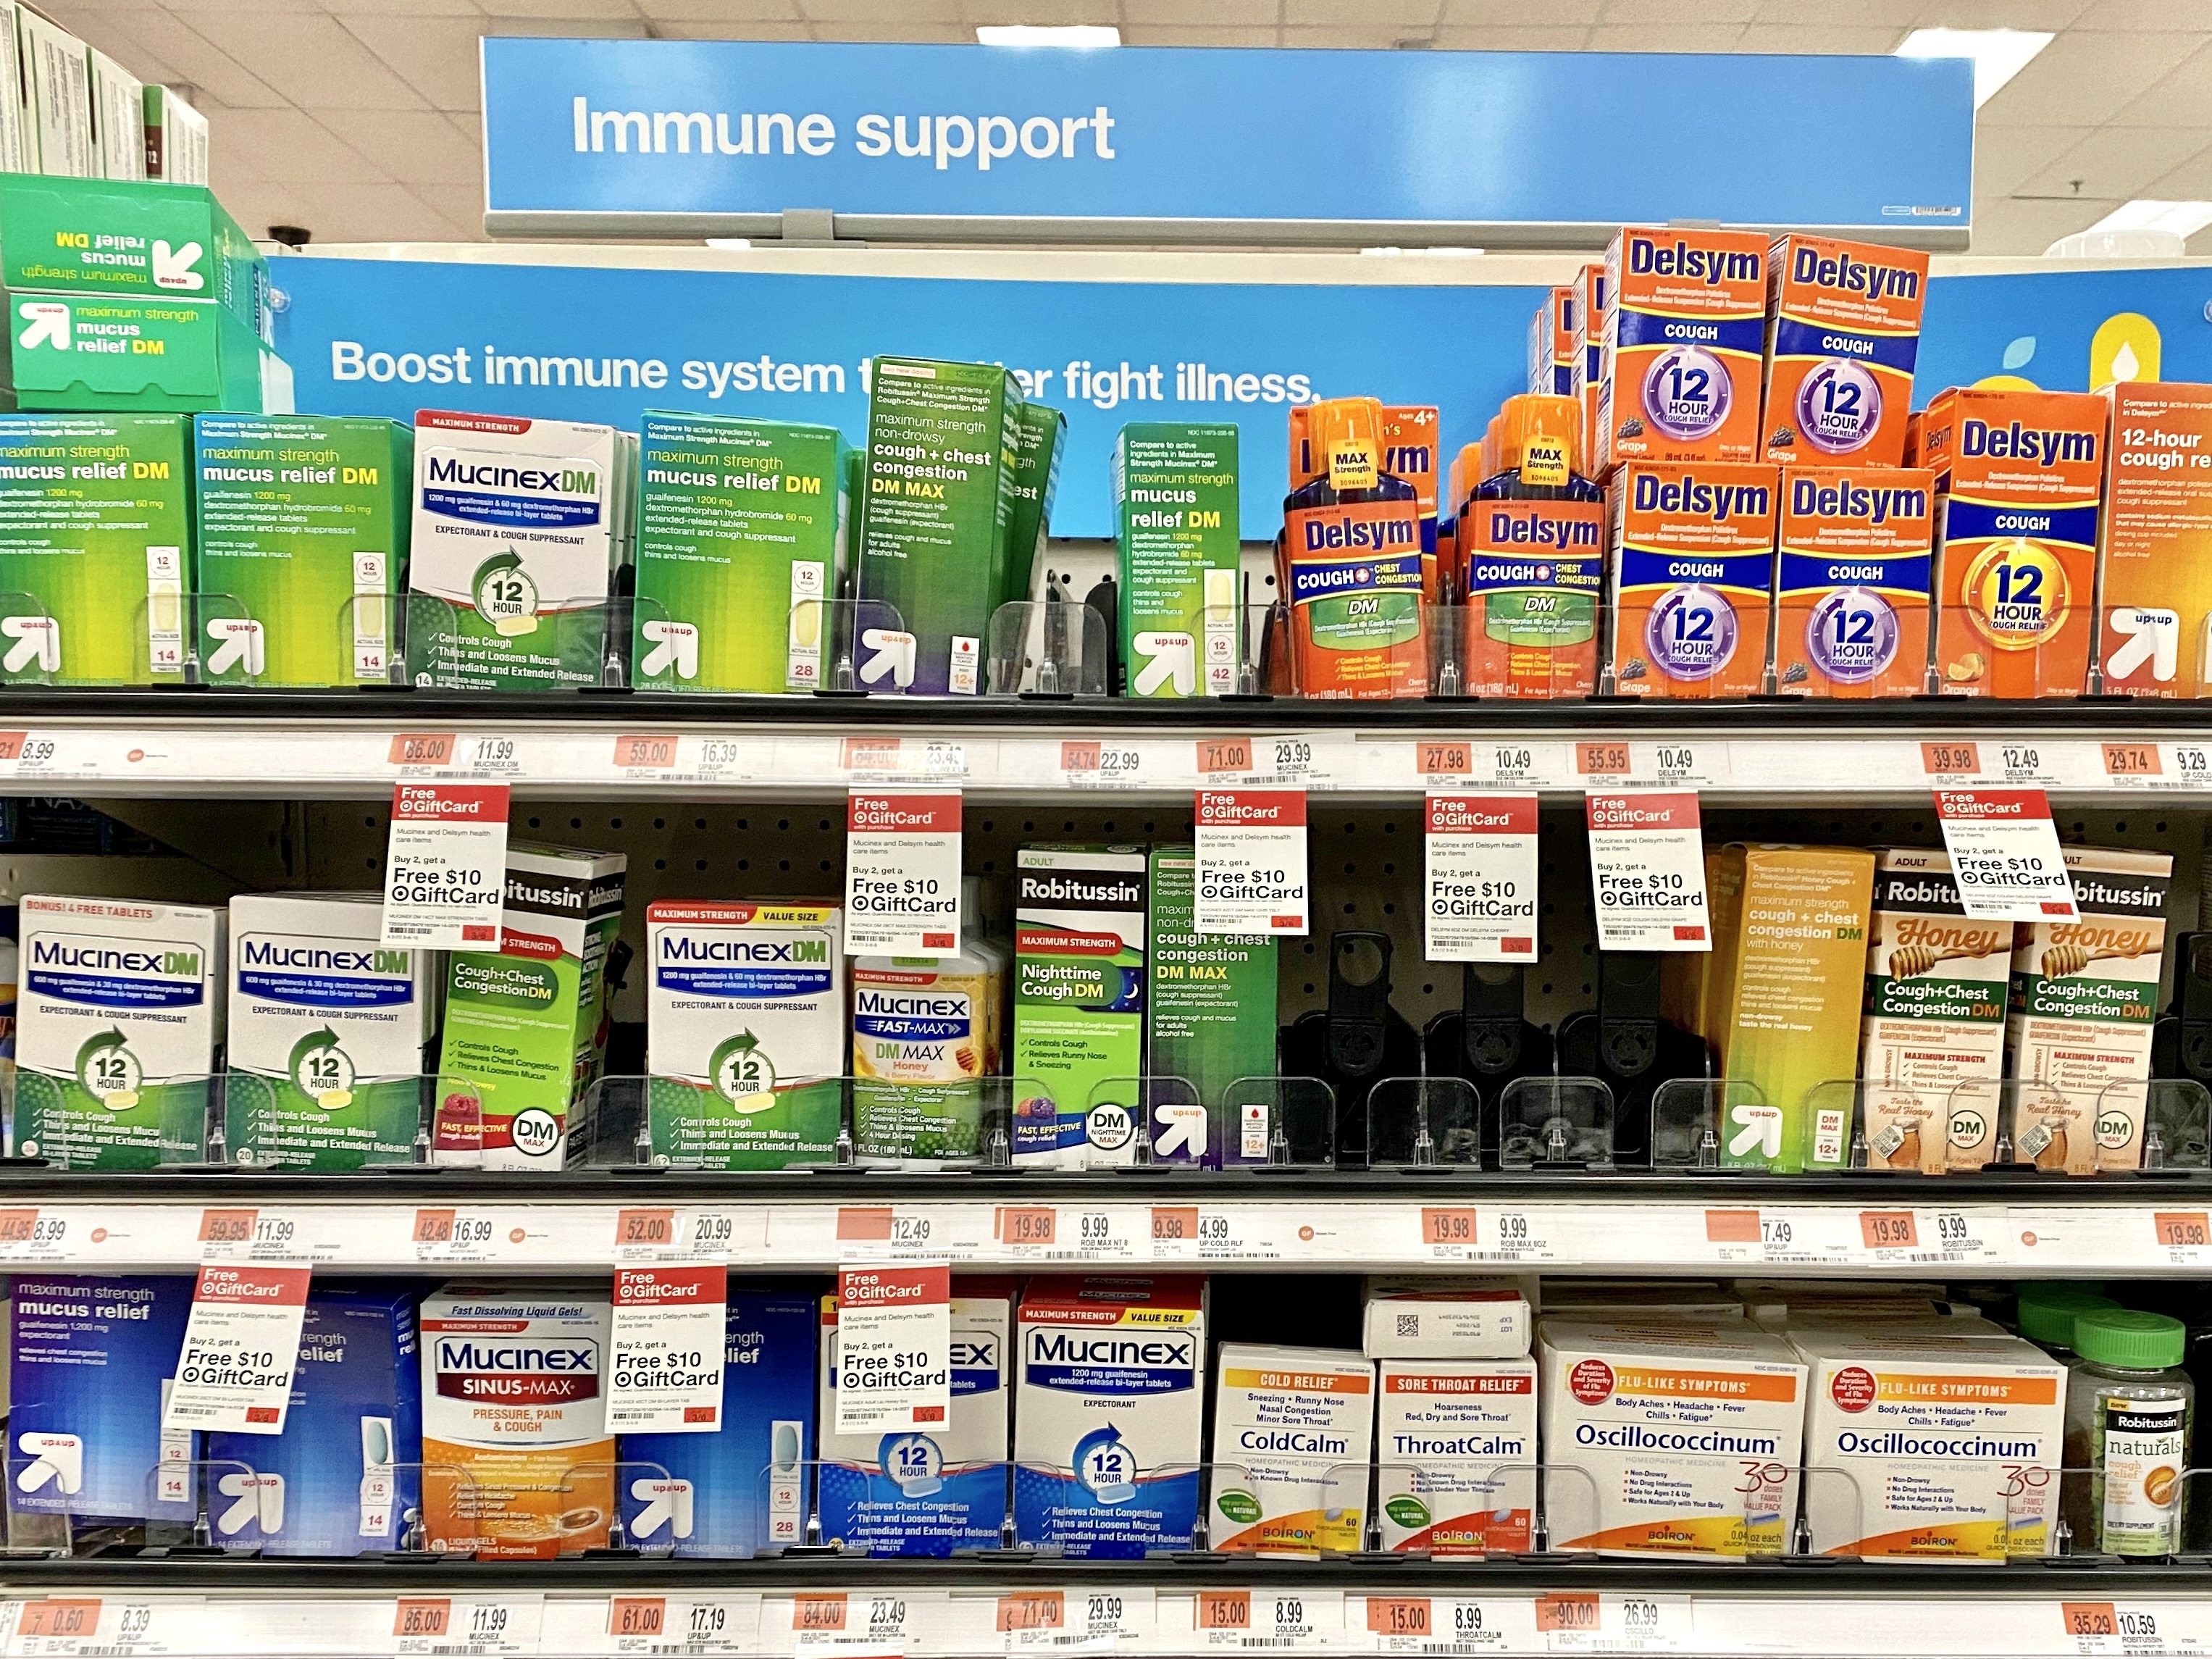 Drug store aisle with Mucinex and Robitussin next to homeopathic cold calm, throat calm, and Oscillococcinum.